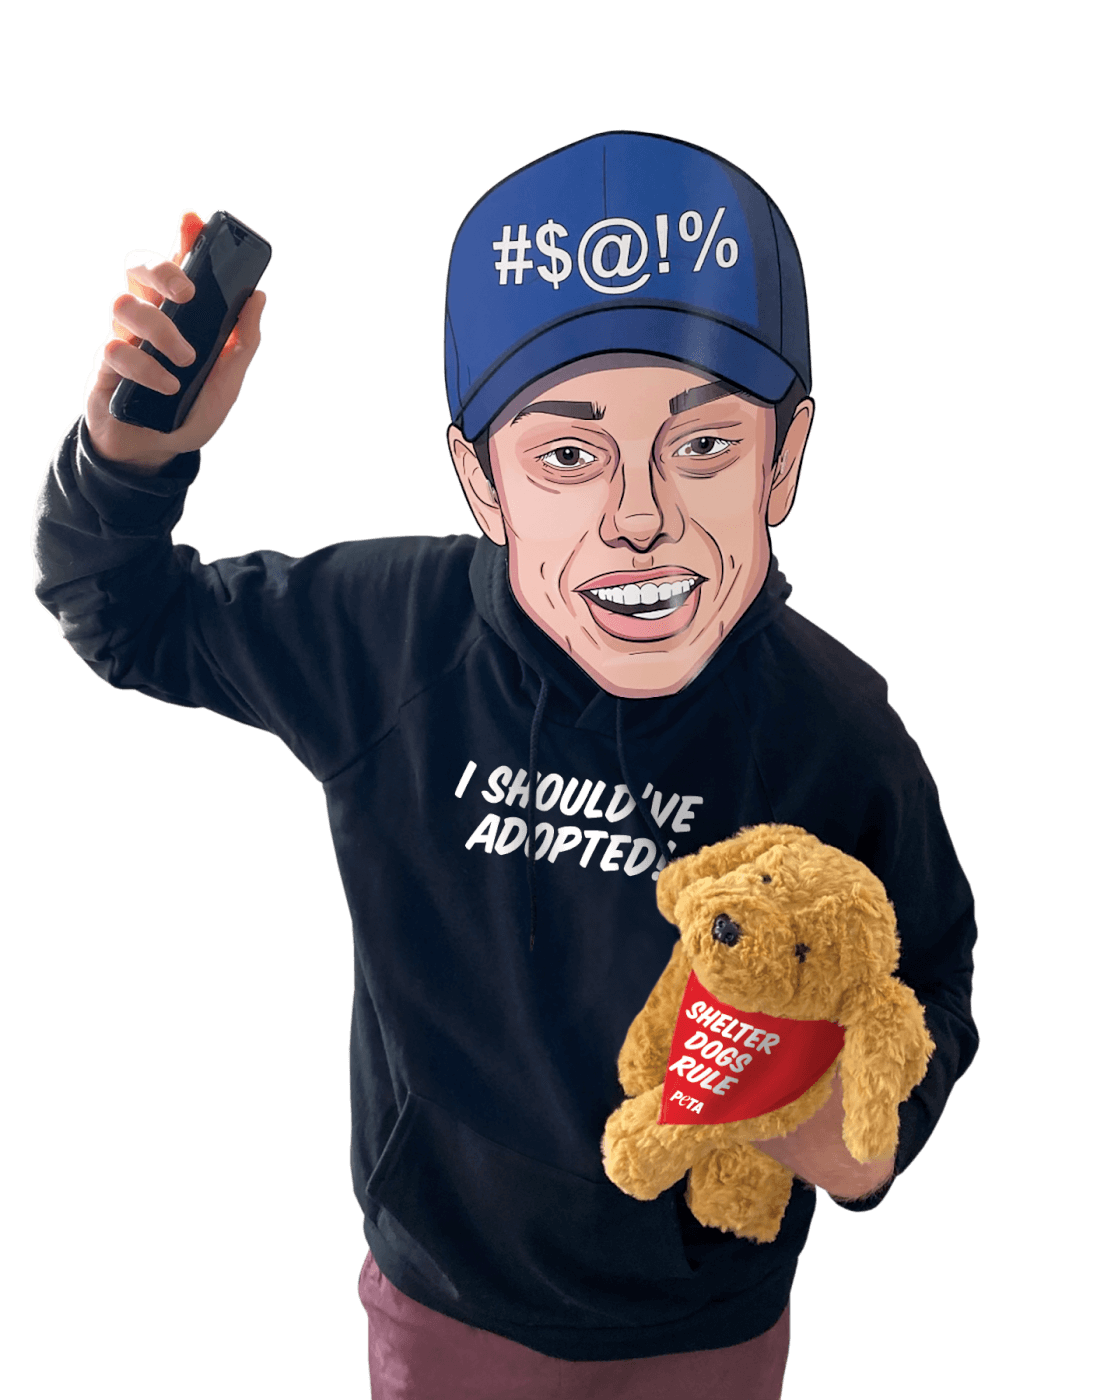 Halloween costume mockup of Pete Davidson holding a dog and cursing PETA for calling him out about buying a dog, as one of PETA's latest animal rights costumes